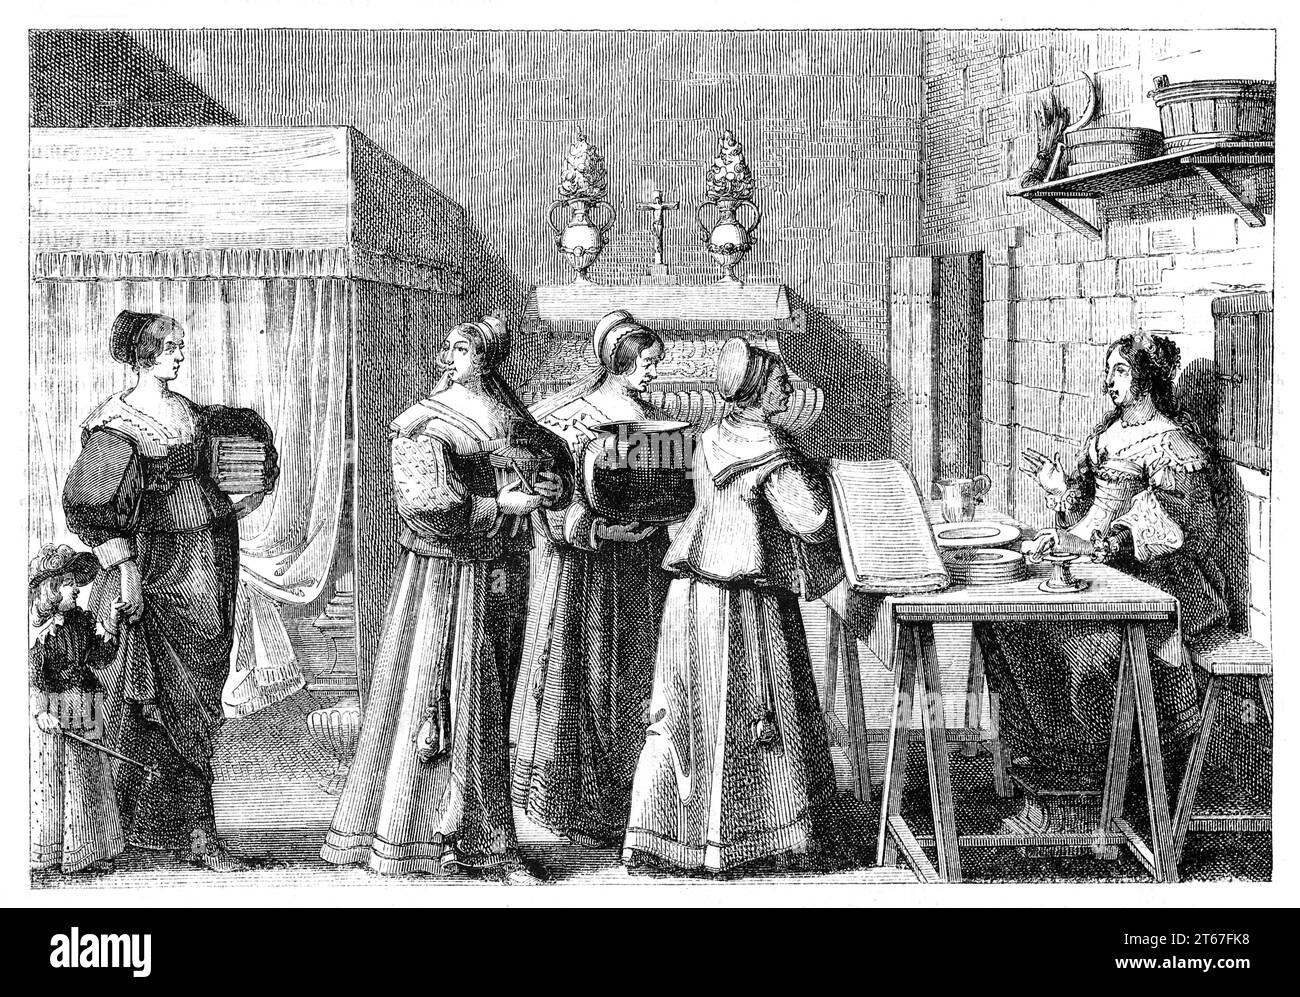 Old illustration of women delivering wedding gifts. By Pauquet after Bosse, publ. on Magasin Pittoresque, Paris, 1851 Stock Photo